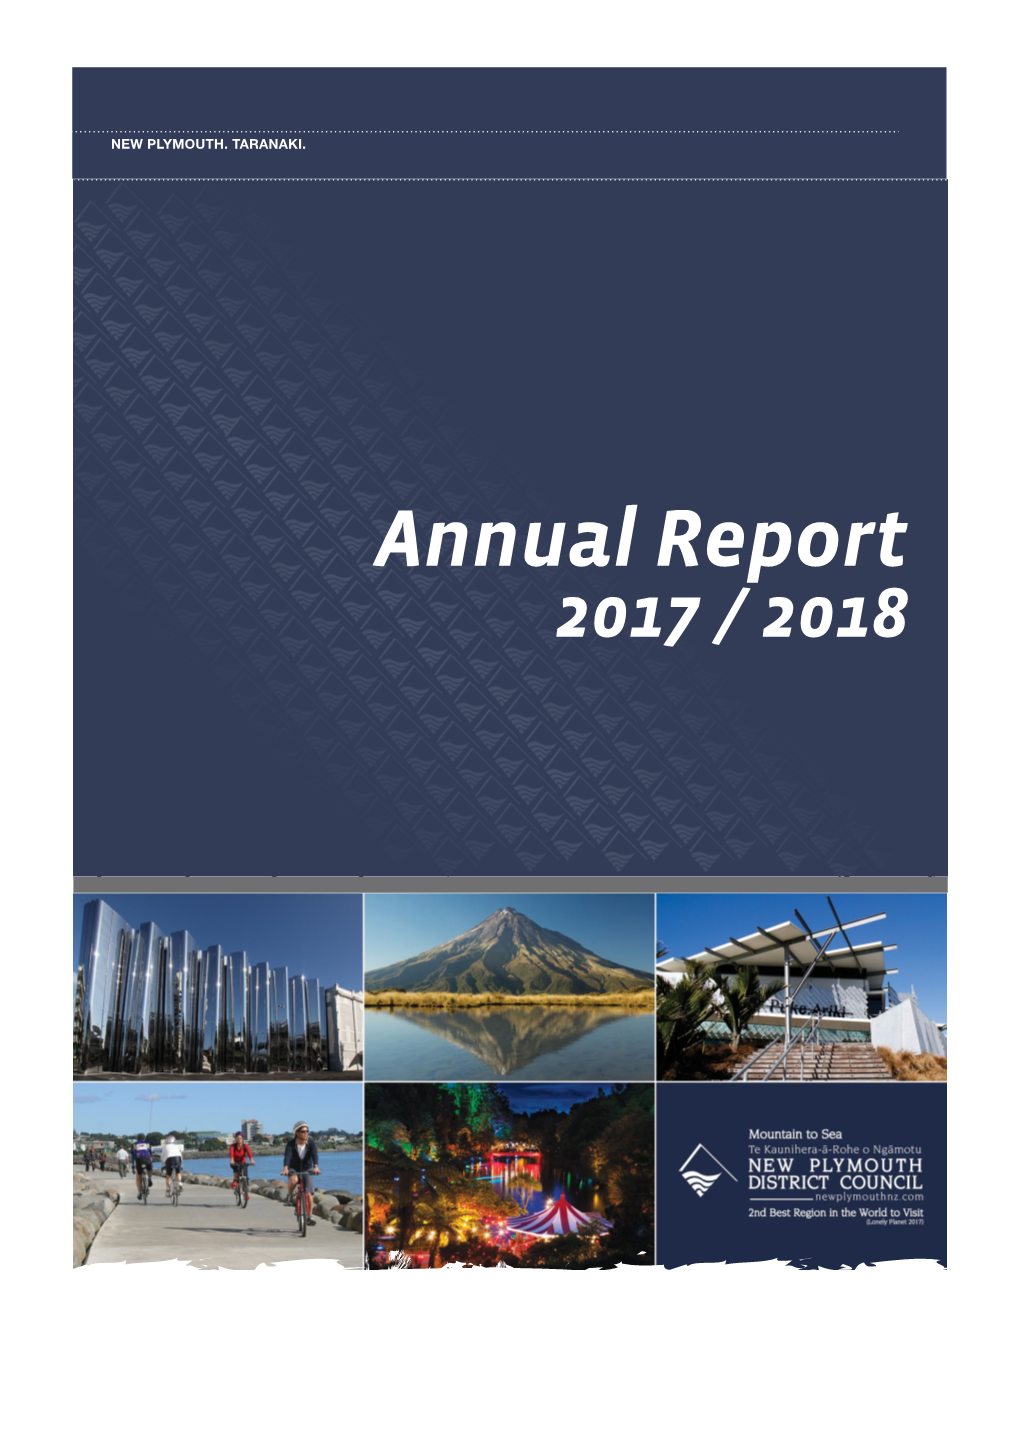 Annual Report 2017 / 2018 Welcome to New Plymouth District Council’S Annual Report for 2015/16